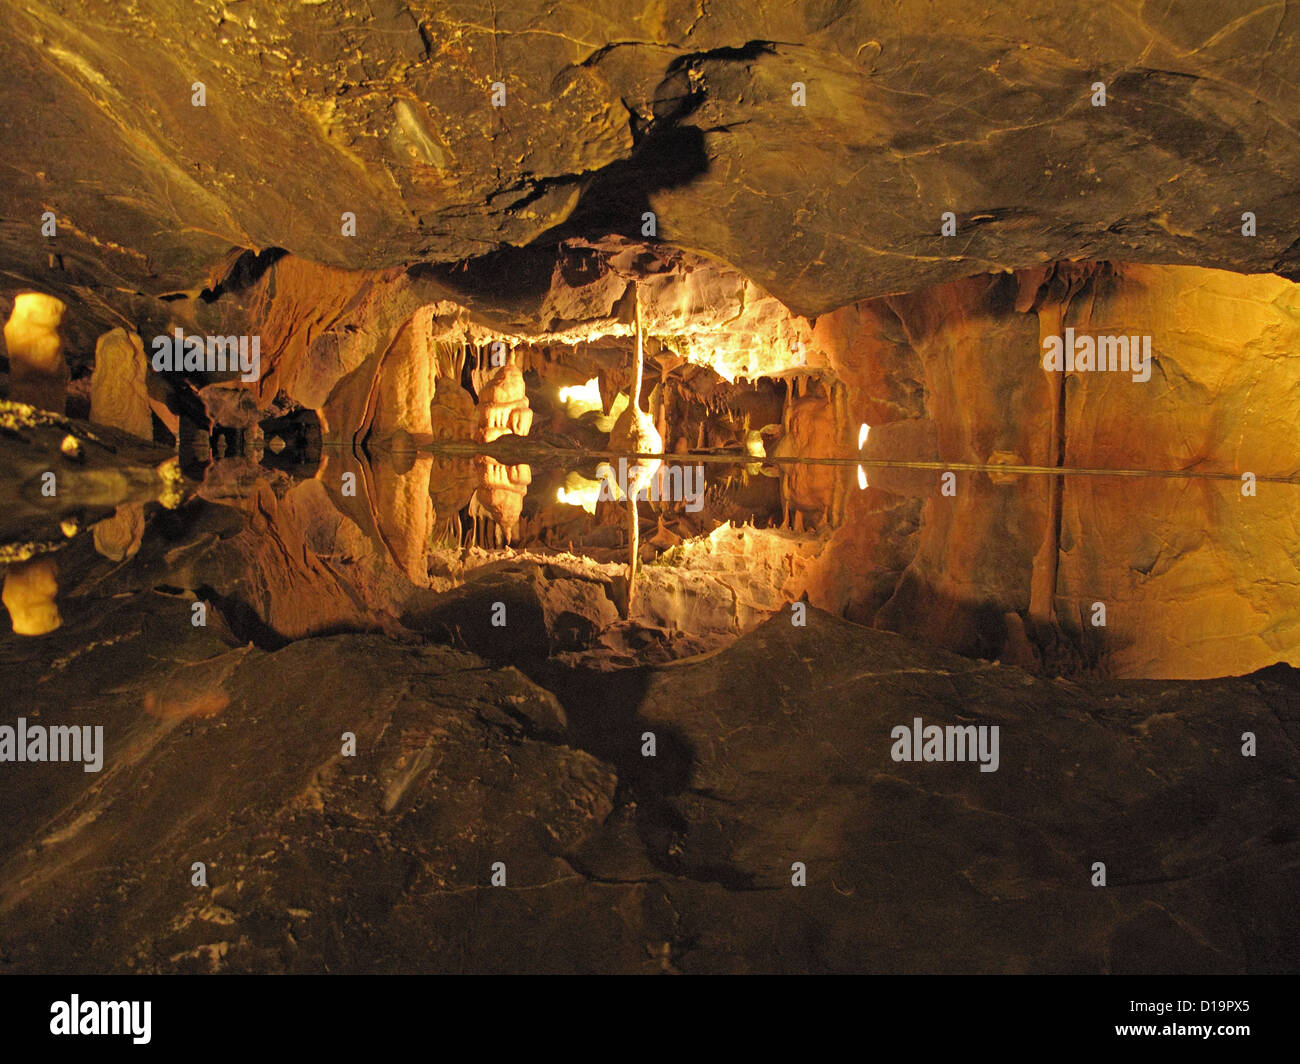 Still pool of water reflecting detail in the limestone caves of Cheddar Gorge Stock Photo